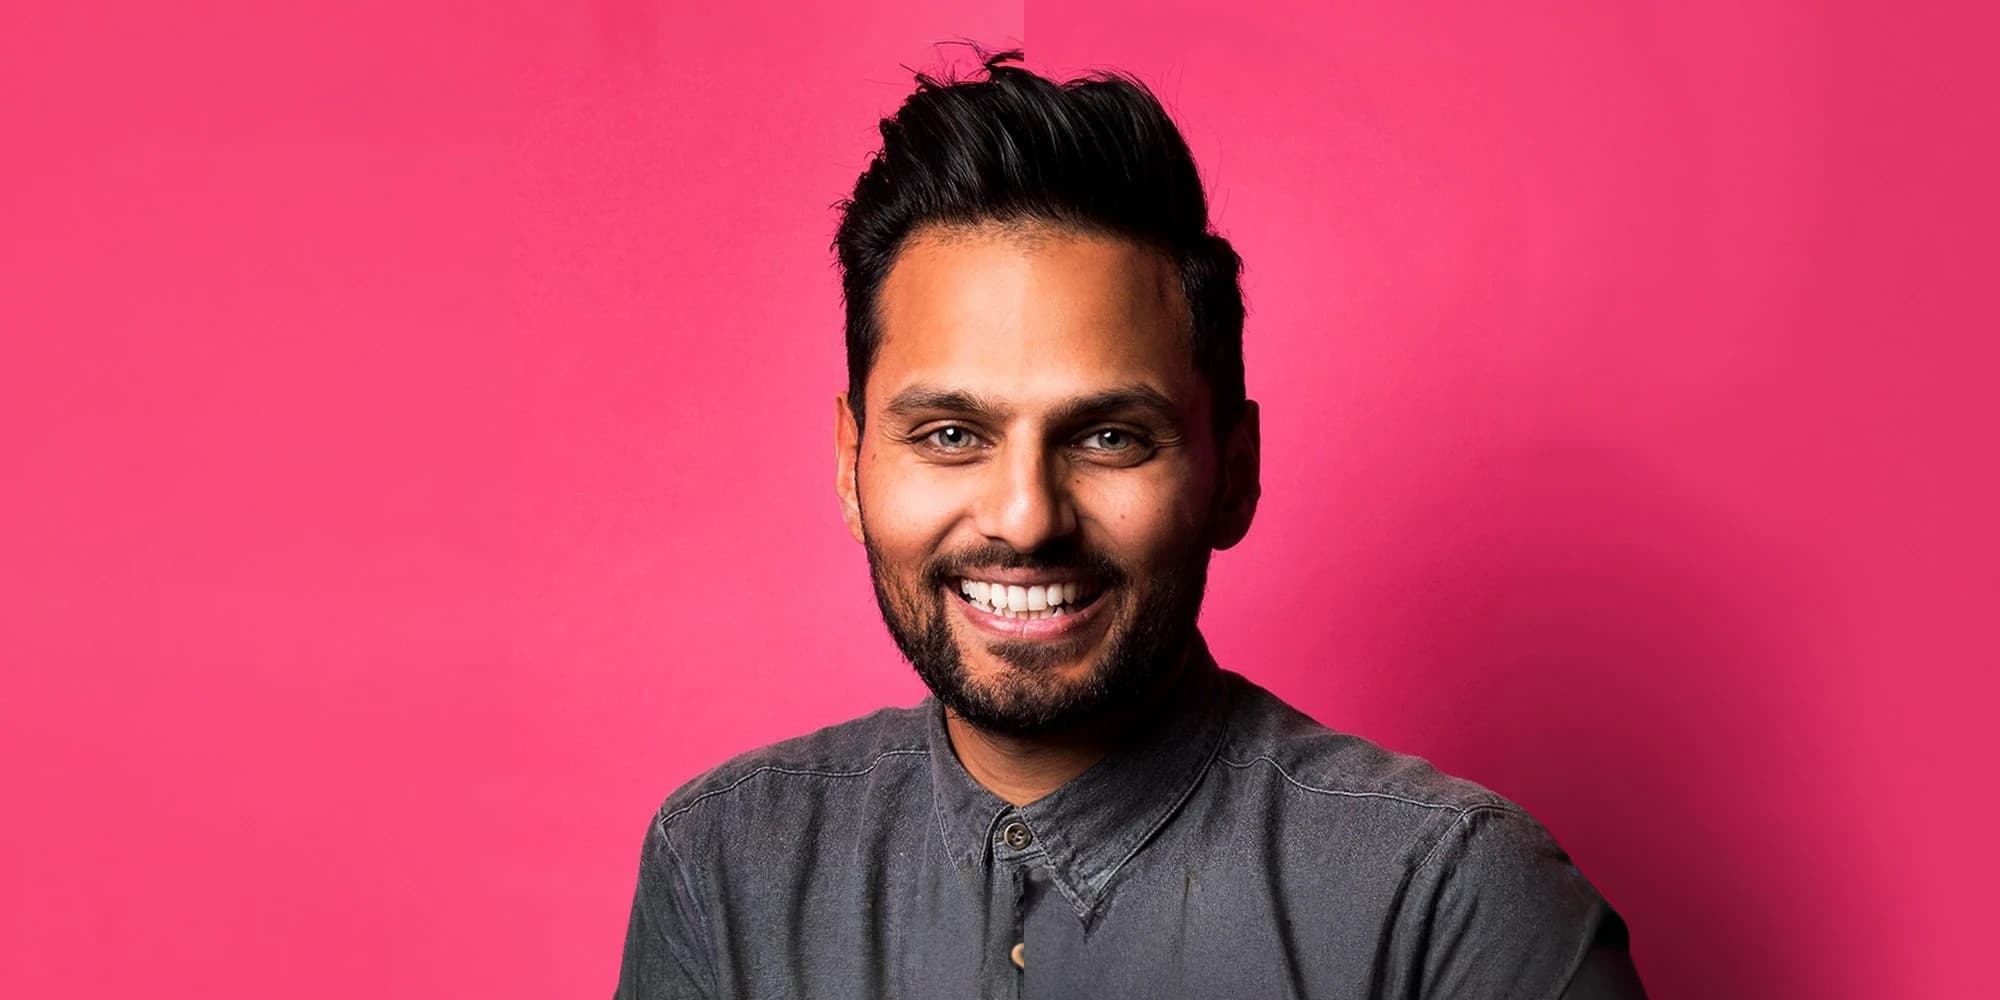 Jay Shetty Book Recommendations: What Are His Favorite Books